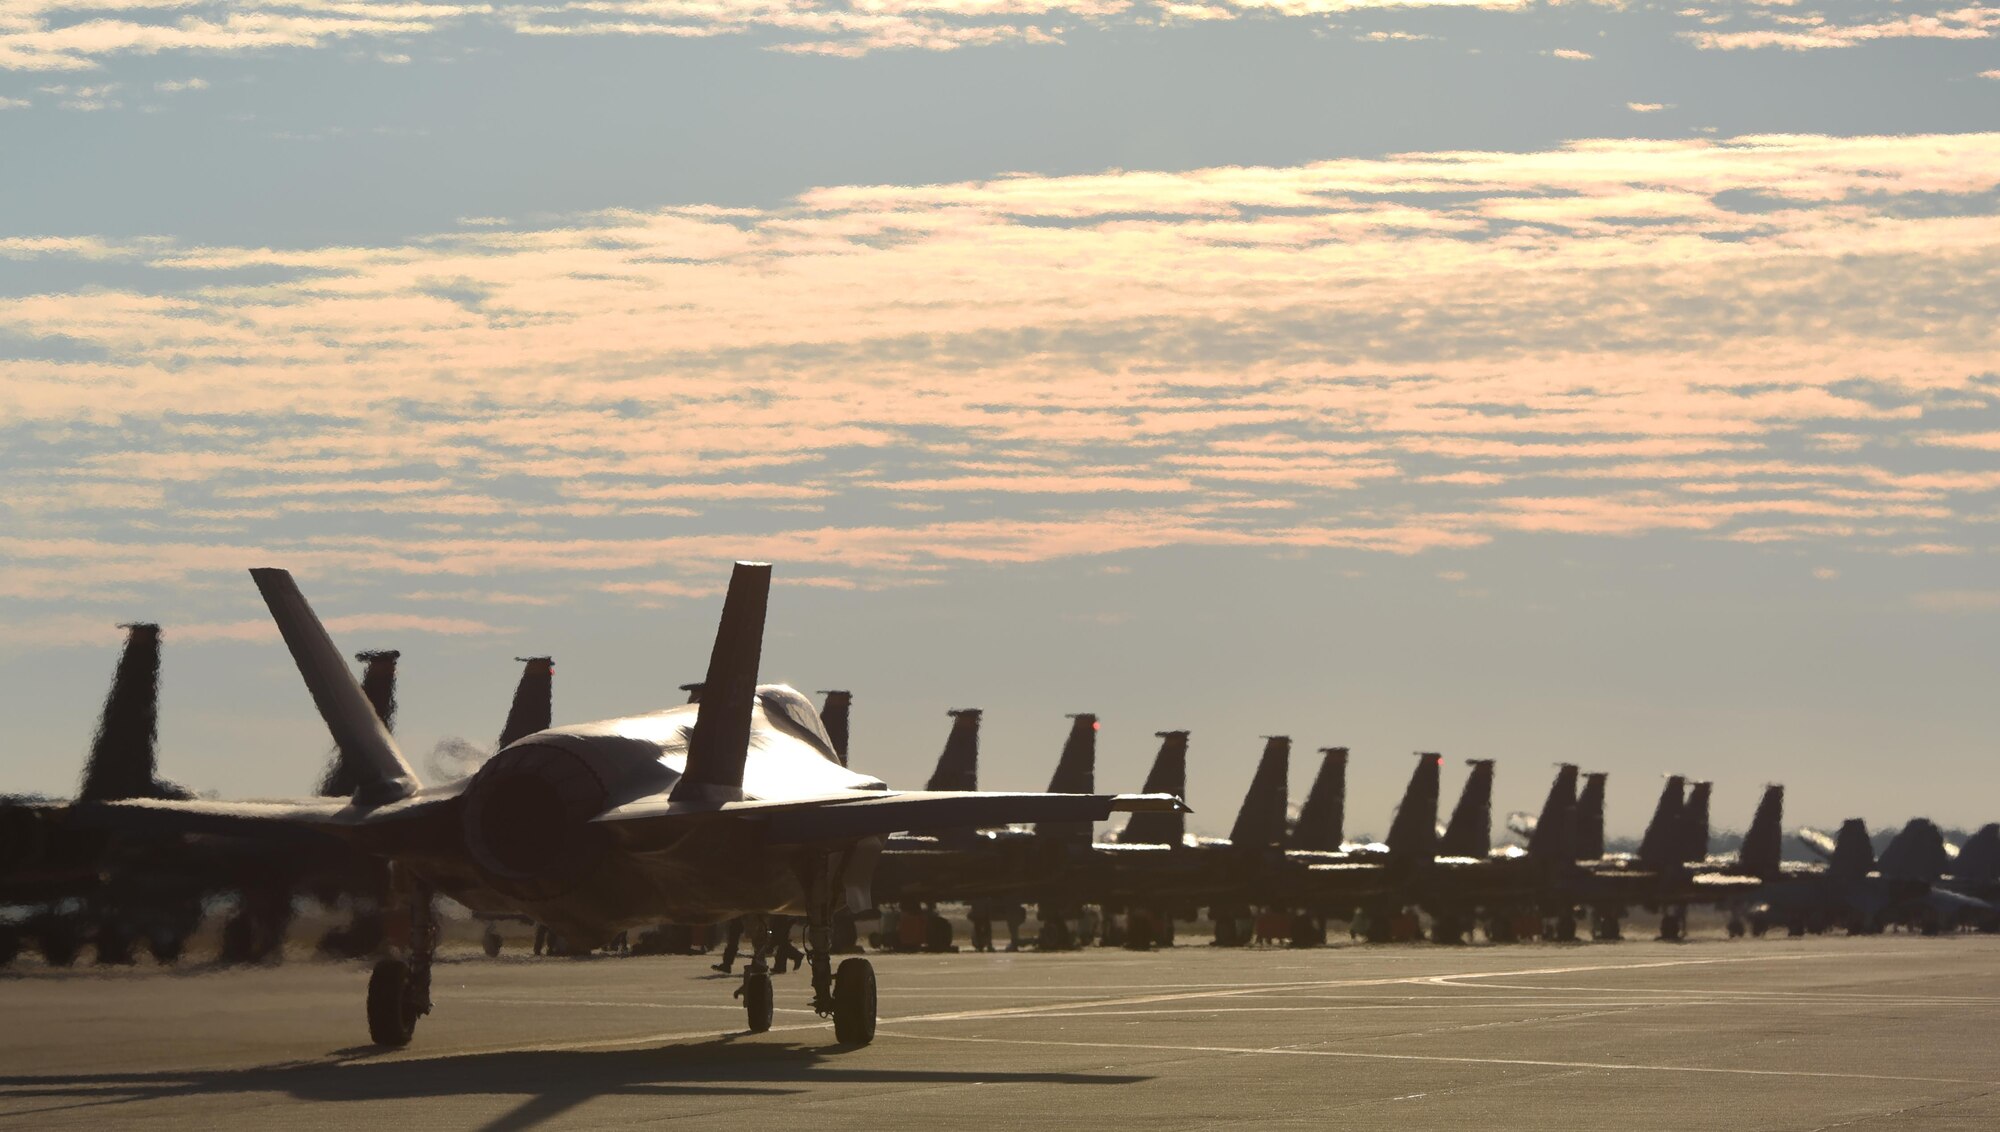 An F-35A Lightning II taxis before takeoff to participate in simulated defensive counter air operations Dec. 8, 2016, at Tyndall Air Force Base, Florida. The 33d Fighter Wing deployed six F-35A Lightning II and 95 personnel to Checkered Flag 17-1. Checkered Flag is a combat rehearsal where 15 aircraft platforms take to the skies to fly realistic and large-scale operations to prepare for contingency operations.  Specifically, this exercise tested the range of capabilities for the F-35A and the 33 FW student and instructor pilots, maintainers, air battle managers and intel by operating from two locations. (U.S. Air Force photo by Staff Sgt. Peter Thompson)